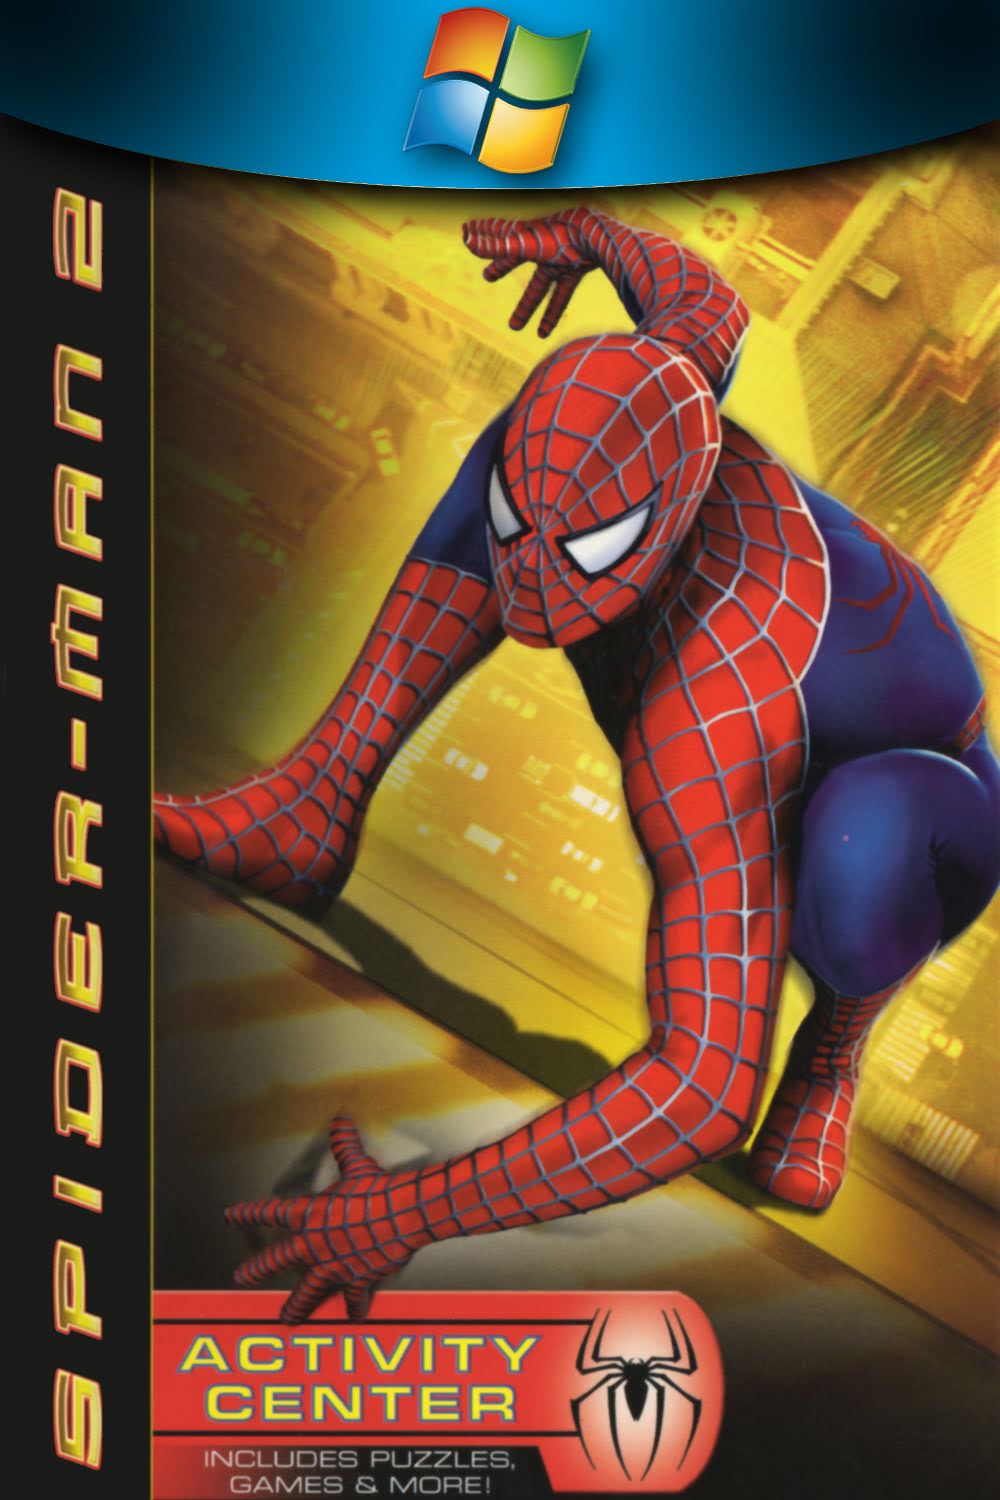 Spider-Man 2 The Game (2004) - PC Review and Full Download